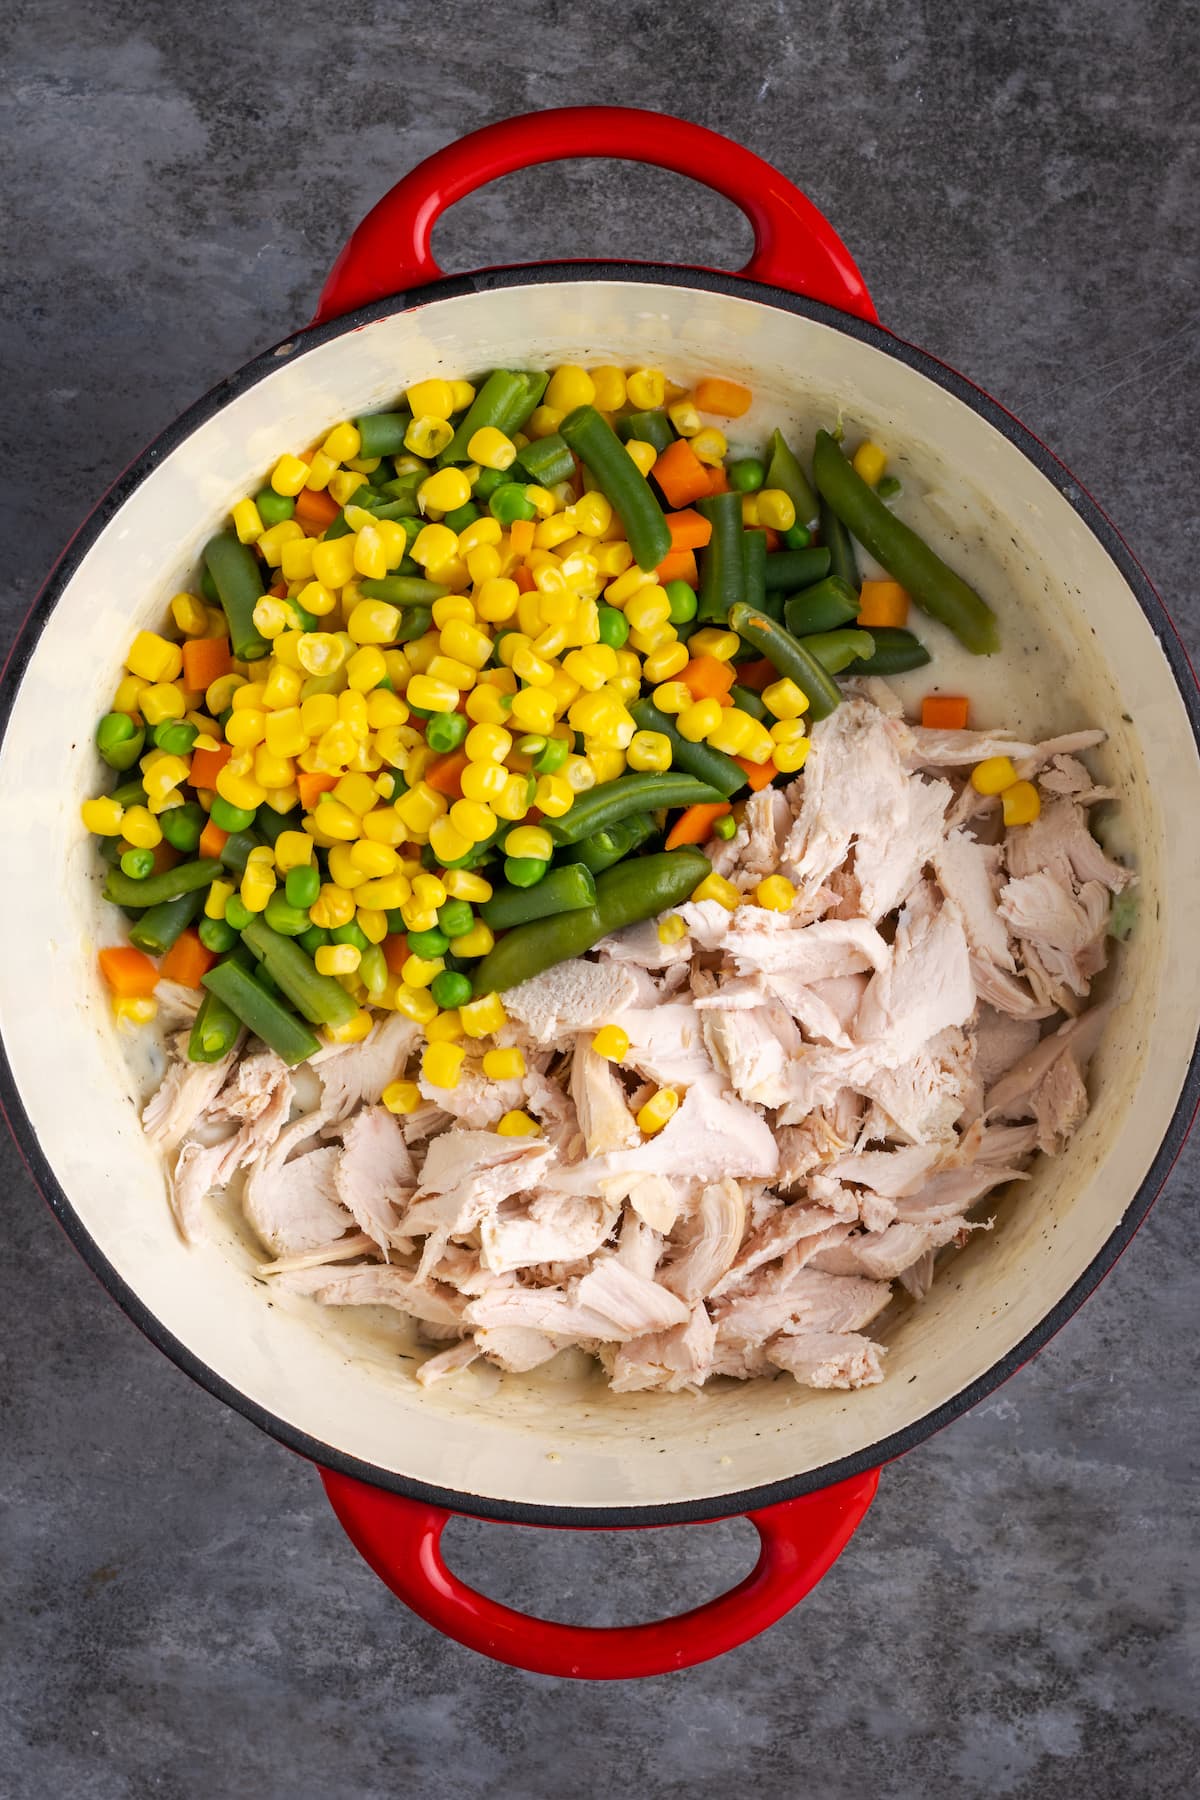 Shredded chicken and cooked frozen veggies added to the chicken pot pie cream sauce in a pot.